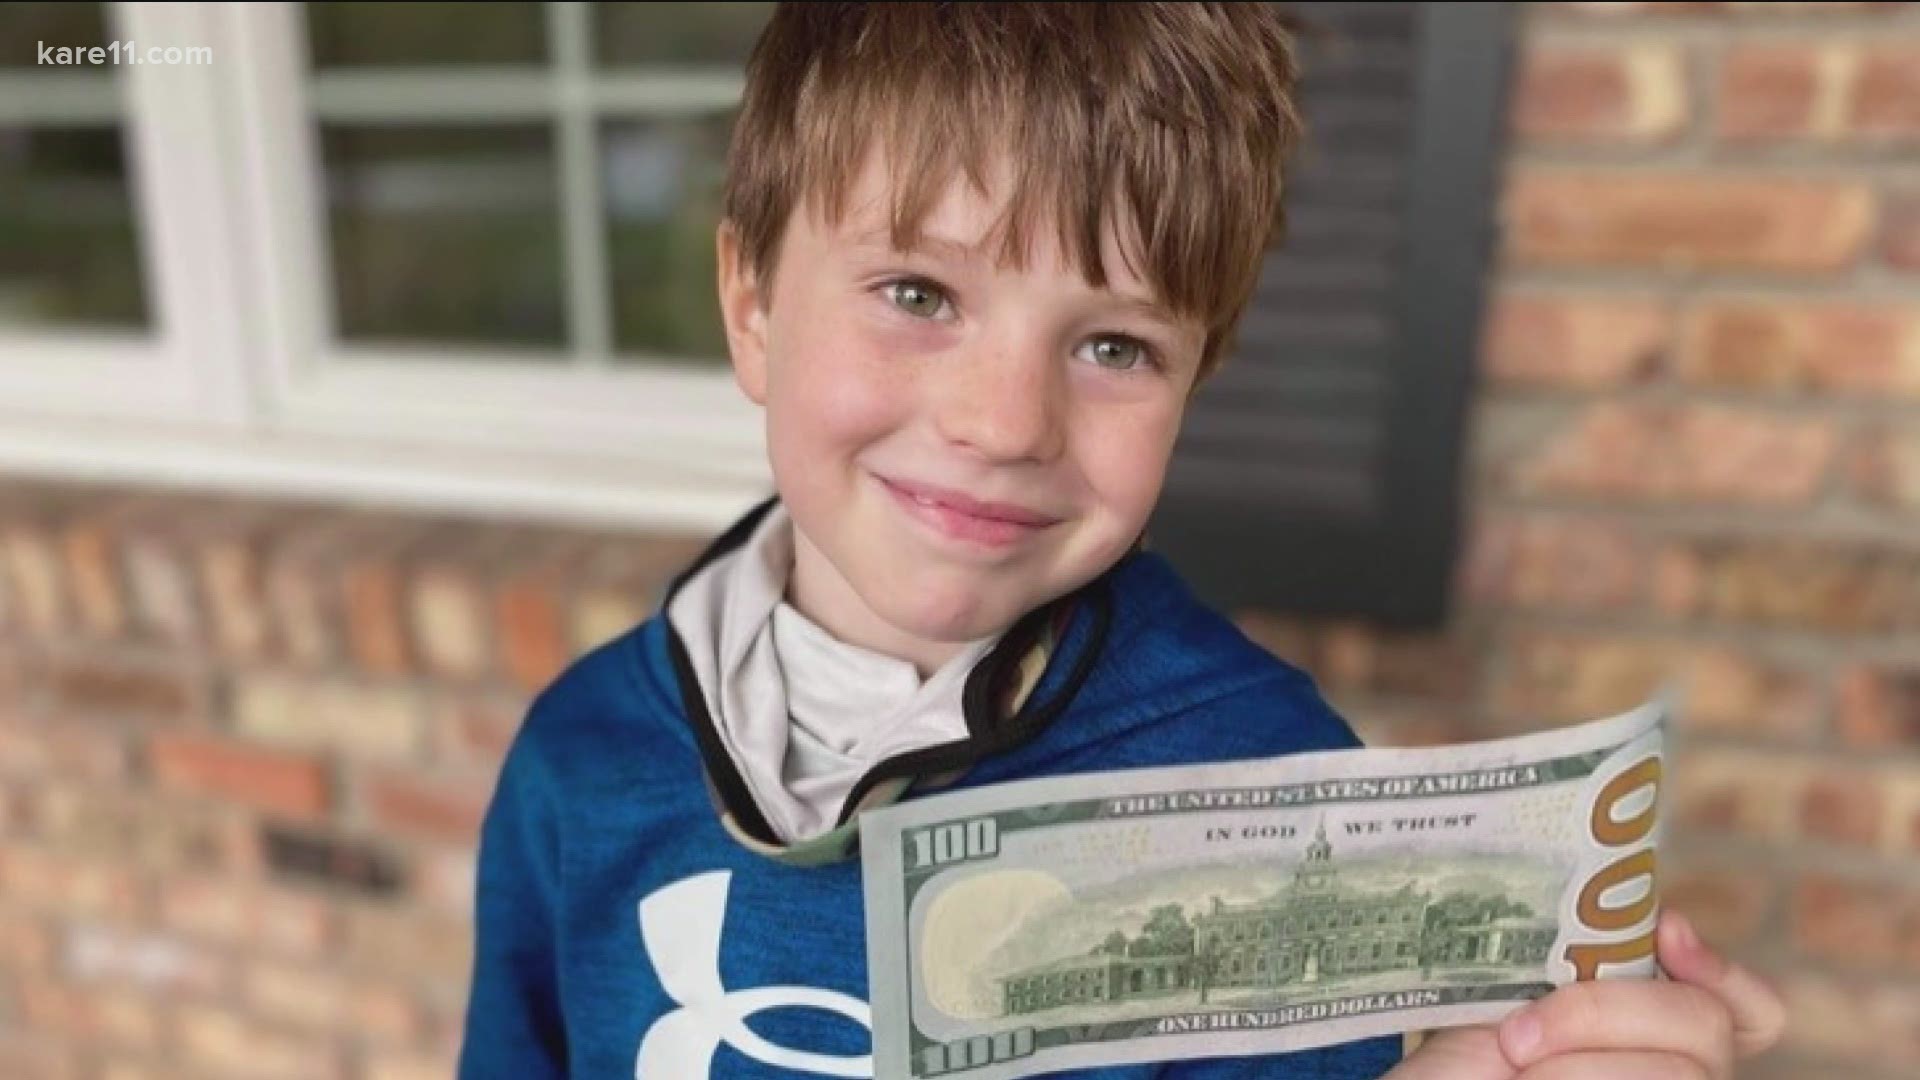 A young boy from Plymouth lost a $100 bill at Target, prompting a group of local moms to step up and help him out.